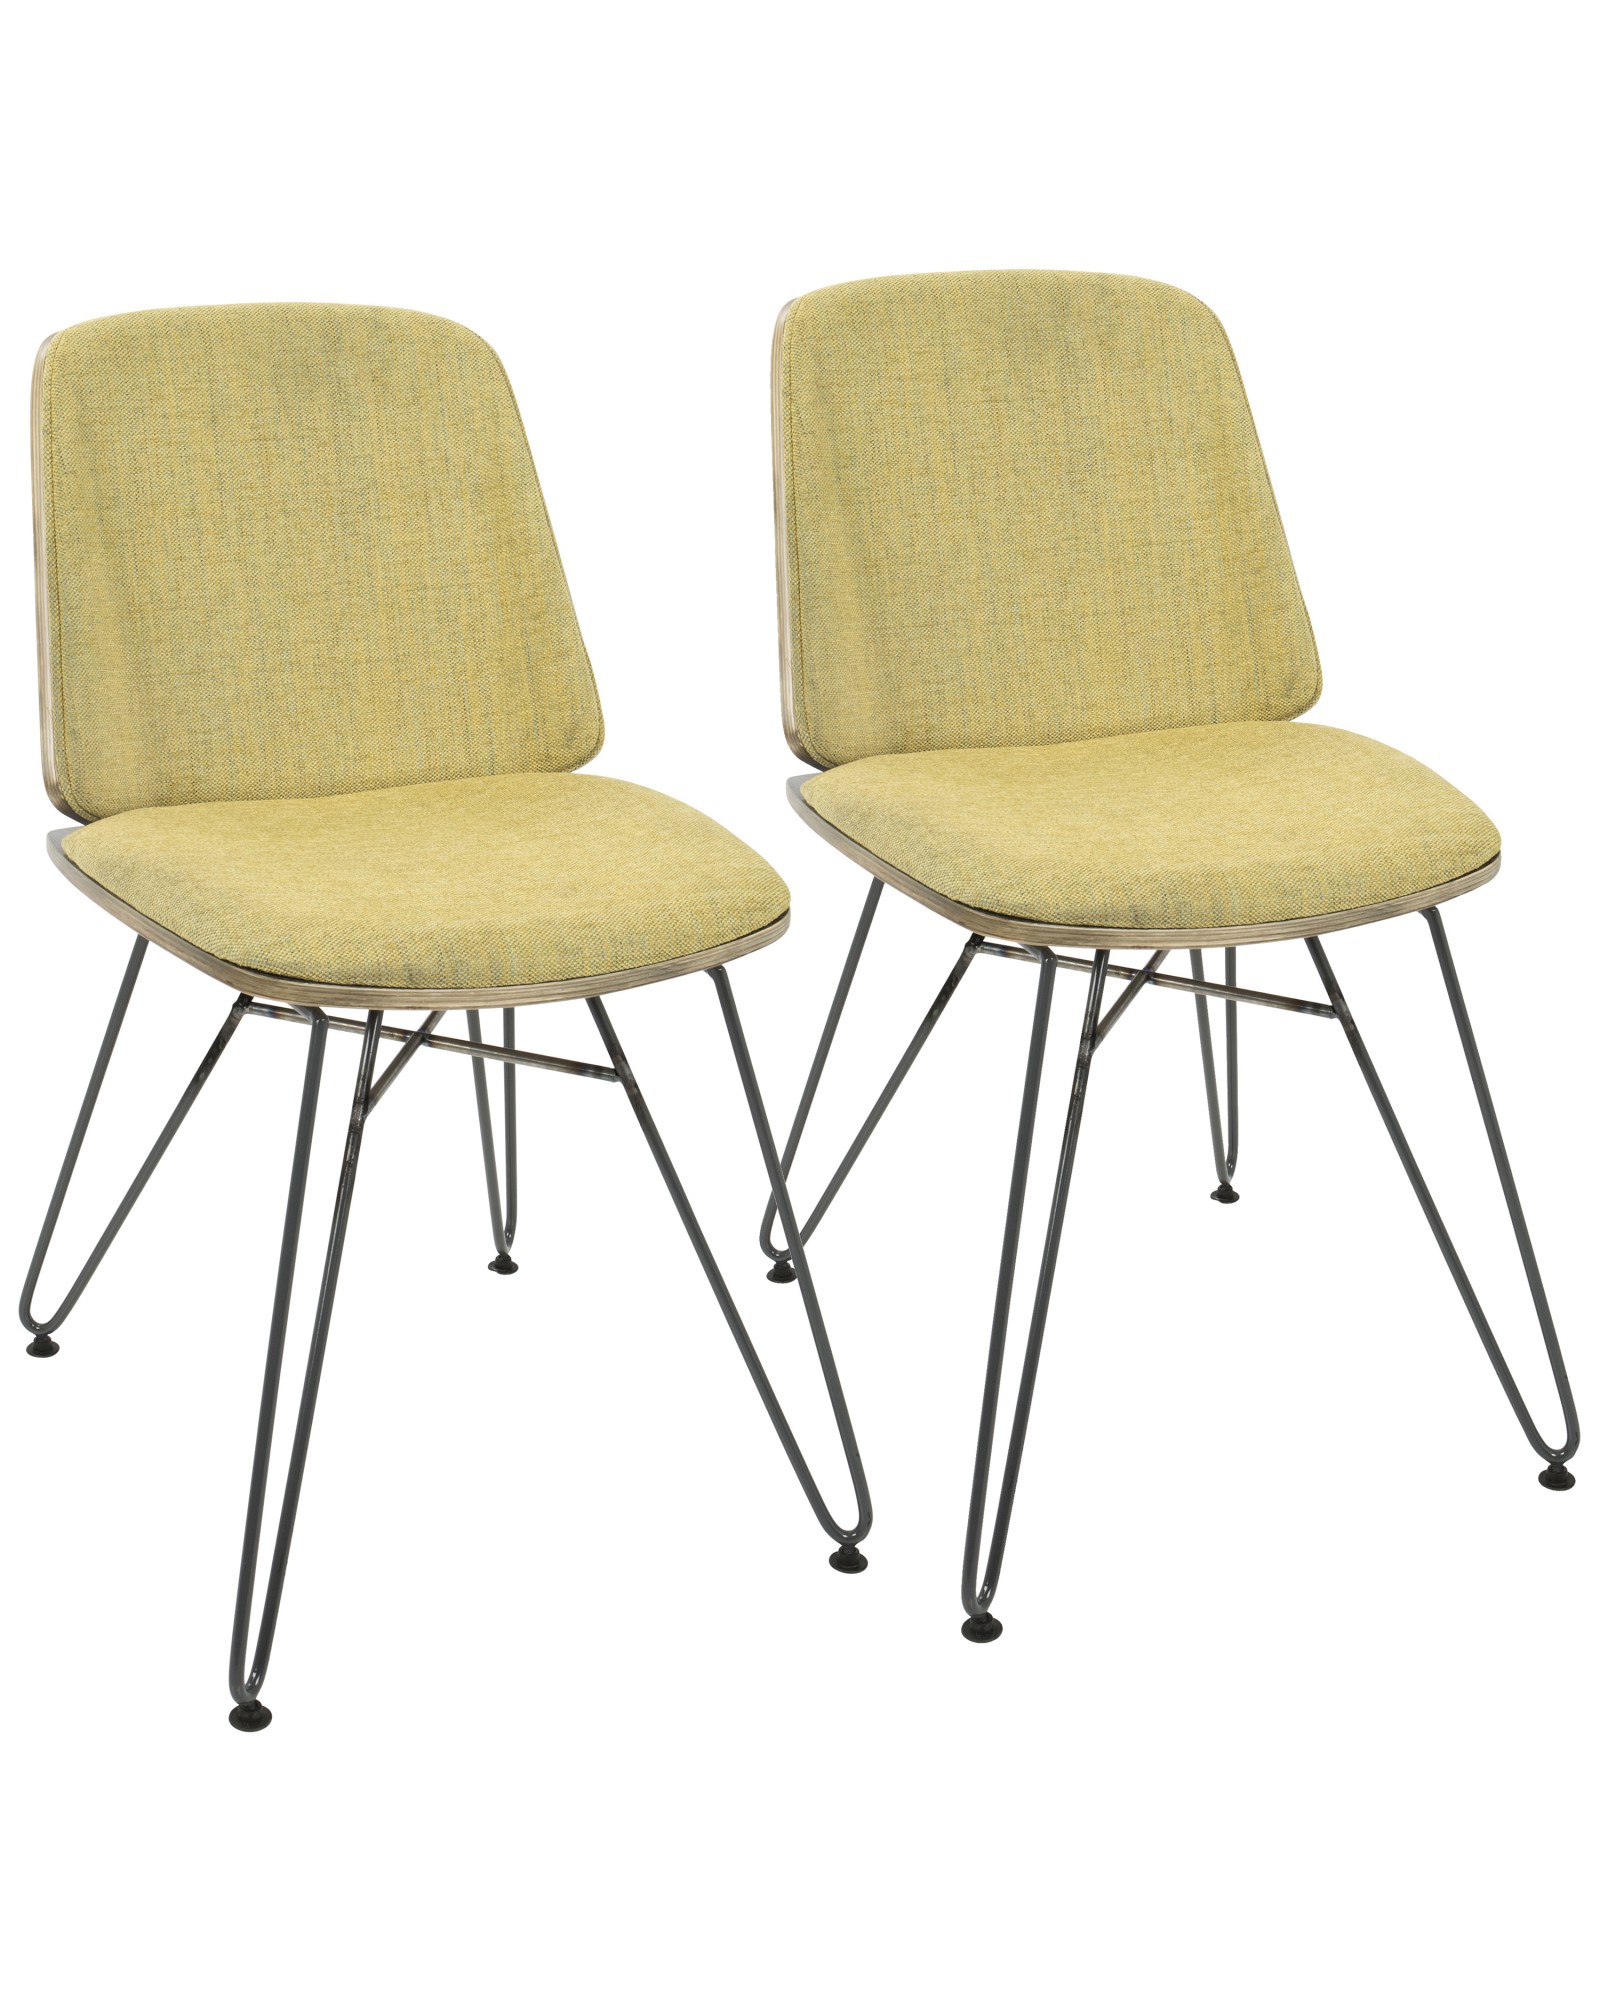 Avery Mid-Century Modern Dining/Accent Chair in Dark Grey Wood and Yellow Fabric - Set of 2